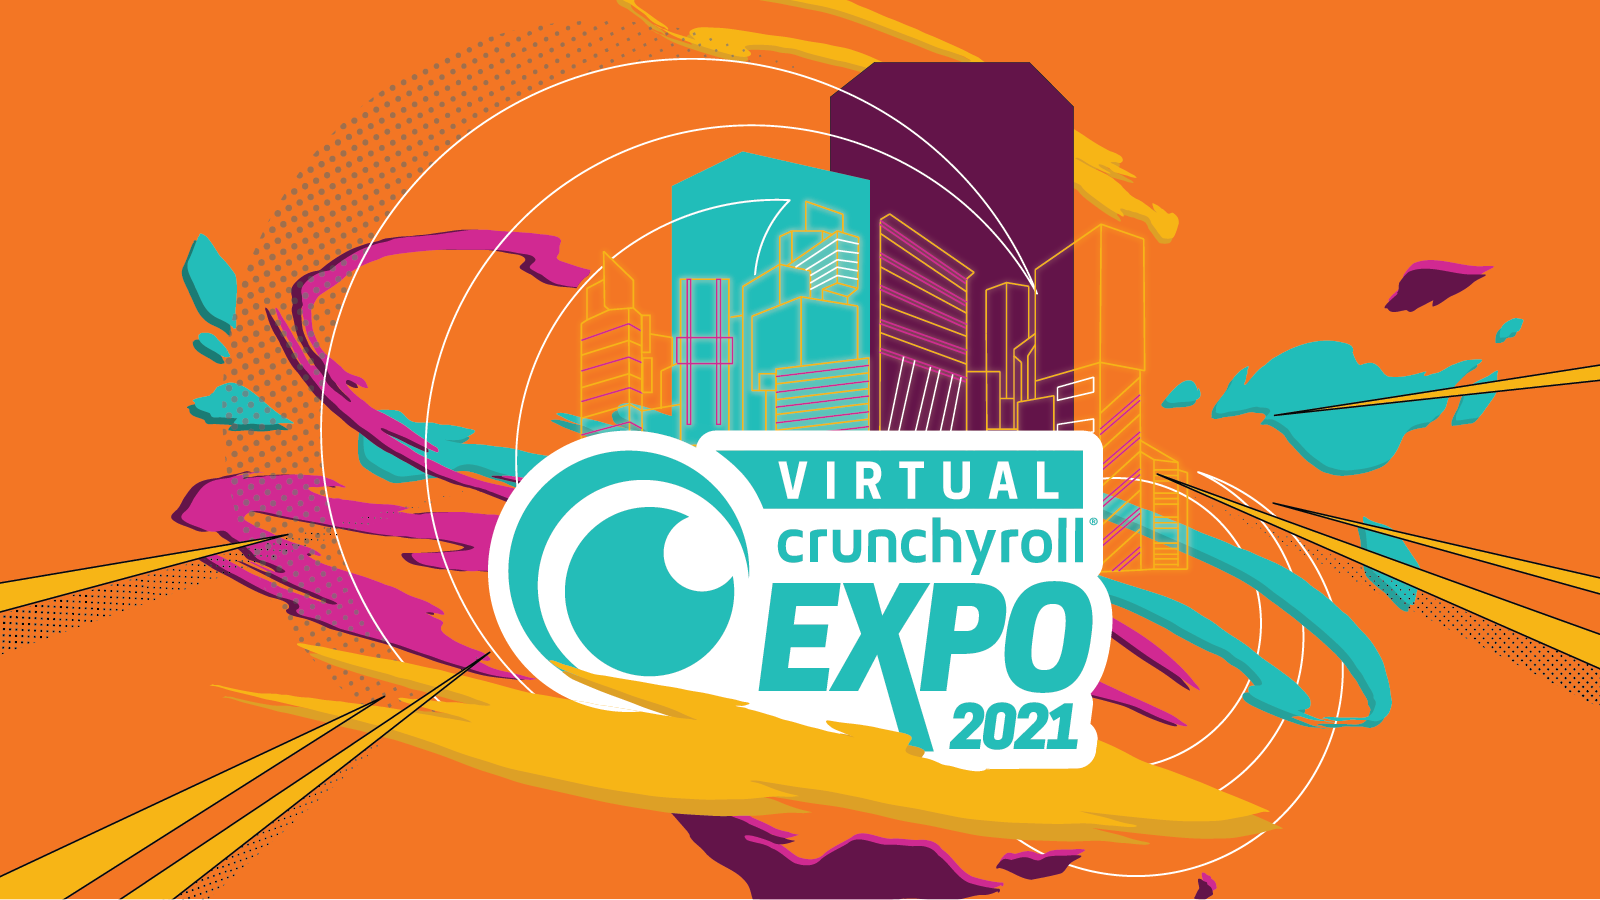 Crunchyroll Expo 2021 will be a Virtual Event this August